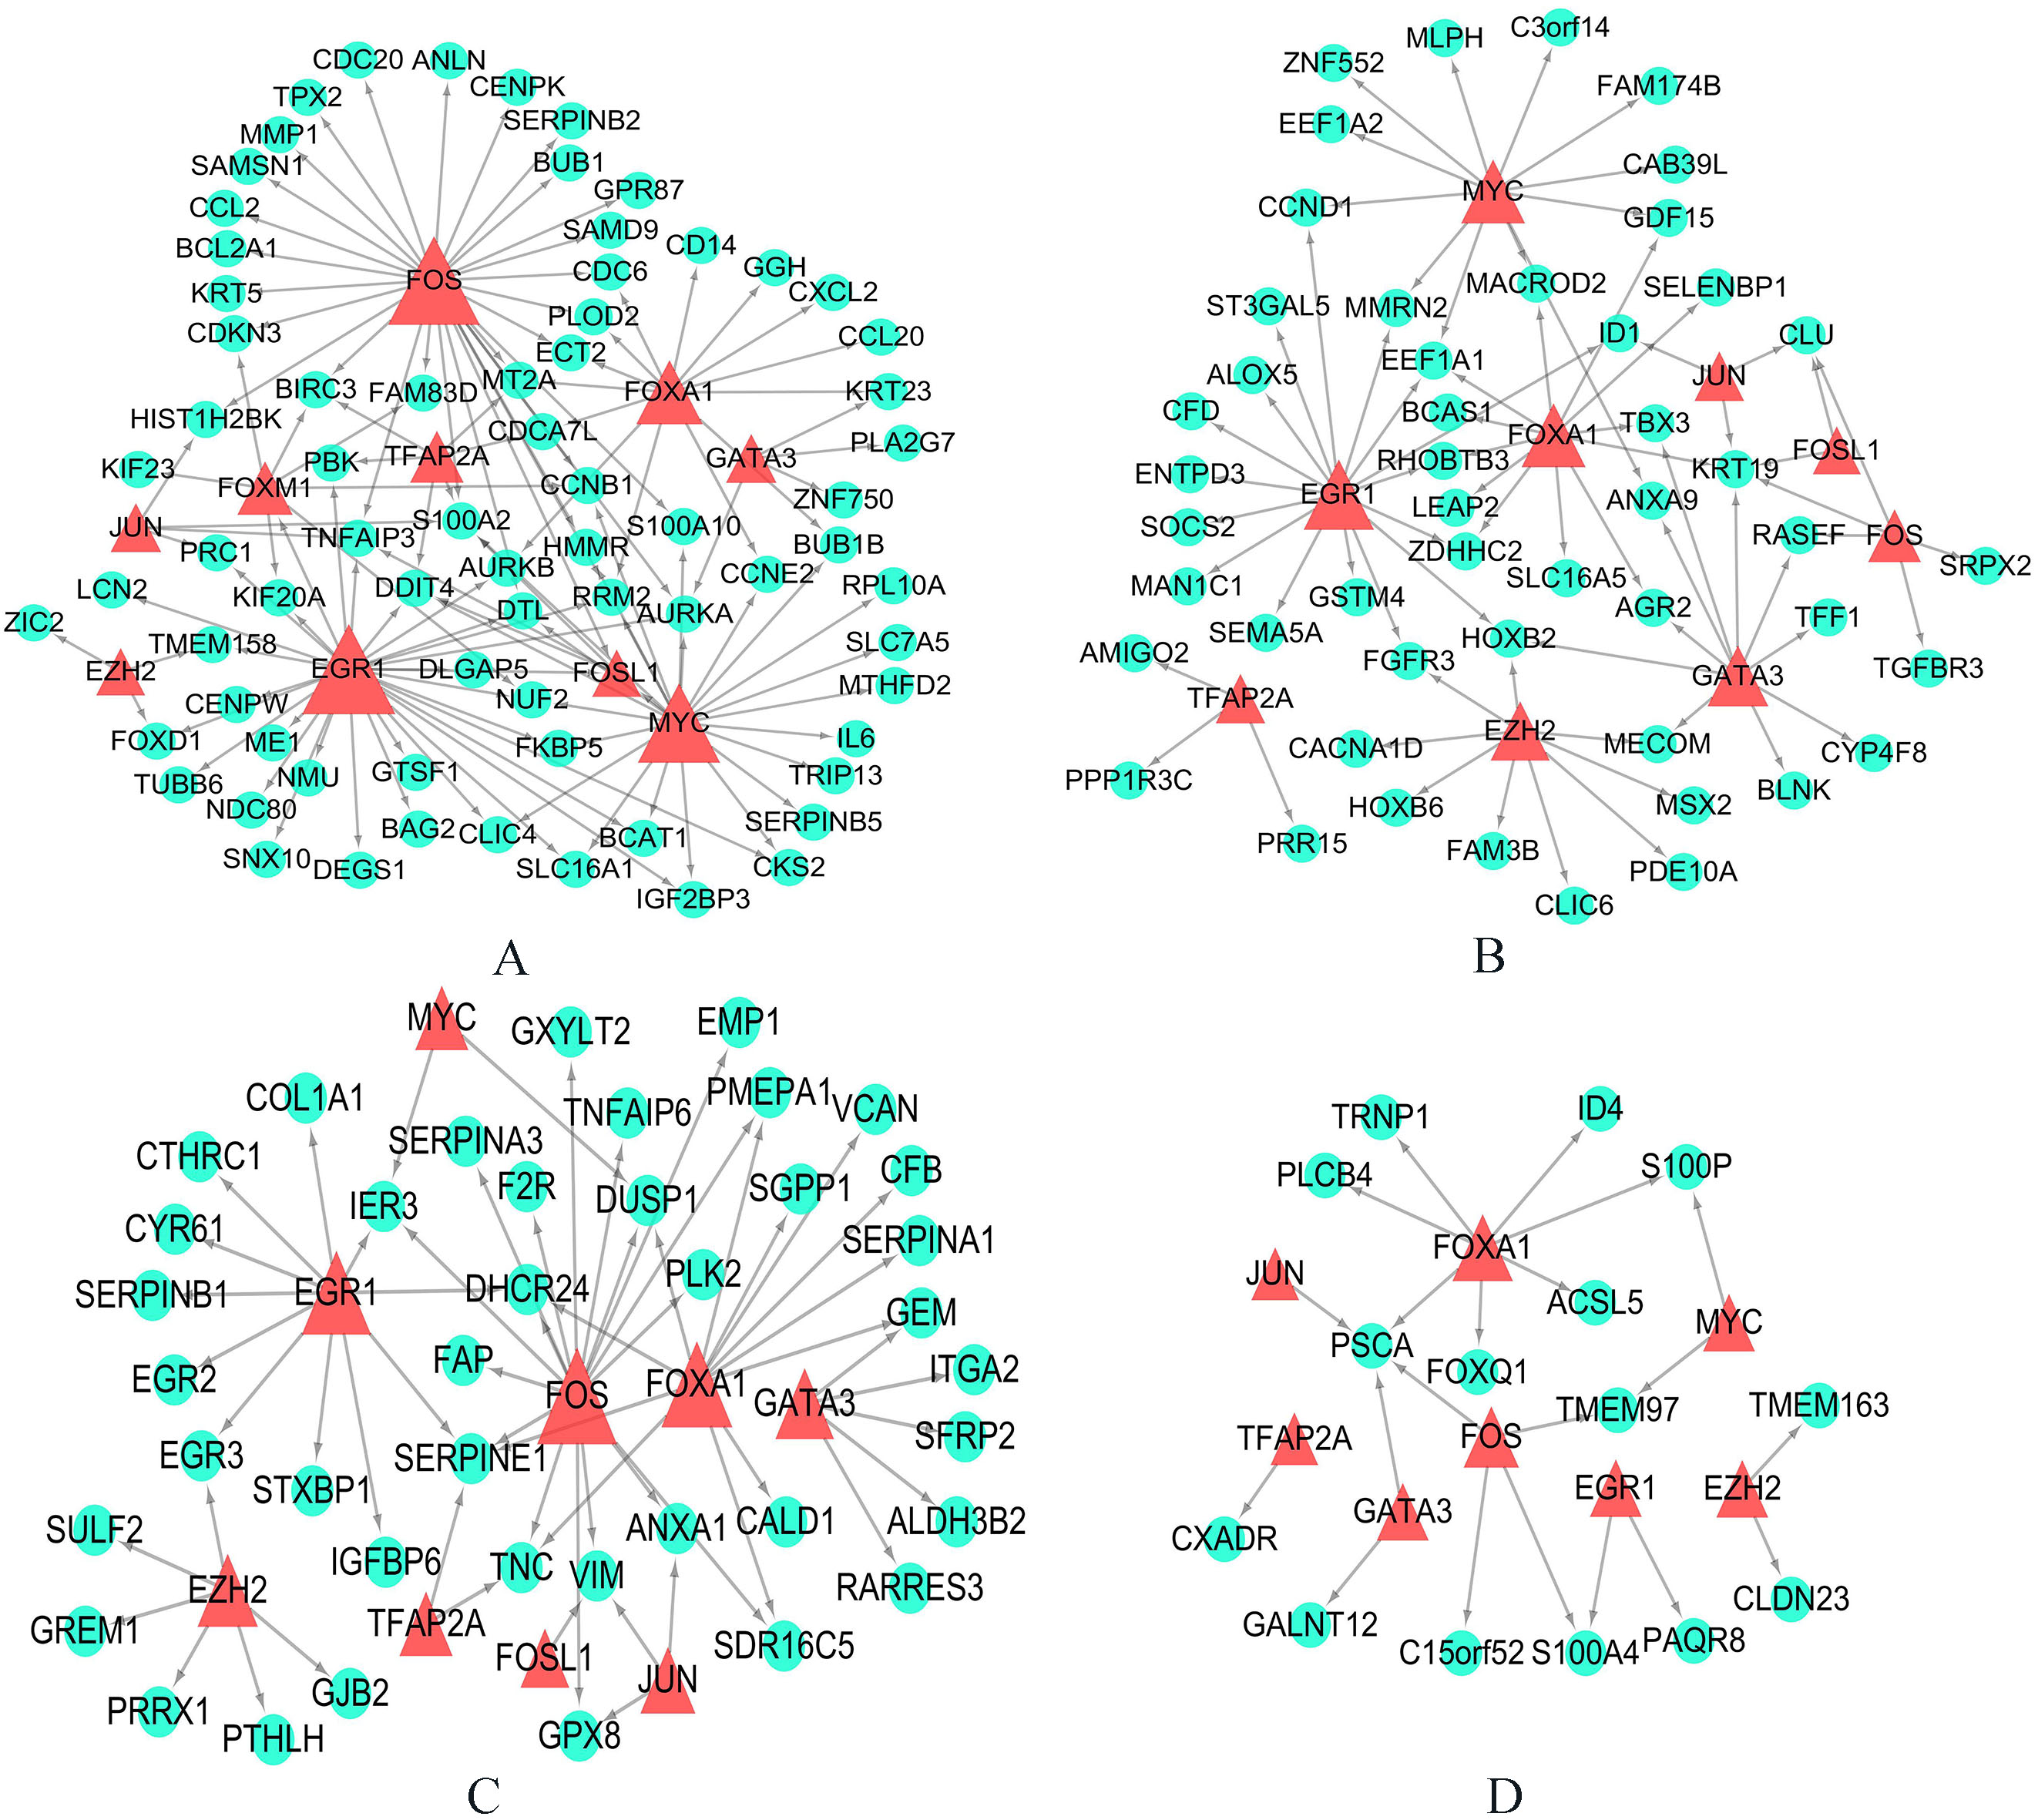 The transcription factor regulatory networks for genes involved in four groups respectively based on TRANSFAC database. The green circles indicate genes in each group, and the red triangles indicate transcription factors which regulate these genes. (A) All basal-related genes for two cancers. (B) All luminal-related genes for two cancers. (C) Basal-related genes for MIBC whereas luminal-related for breast cancer. (D) Luminal-related genes for MIBC whereas basal-related for breast cancer.